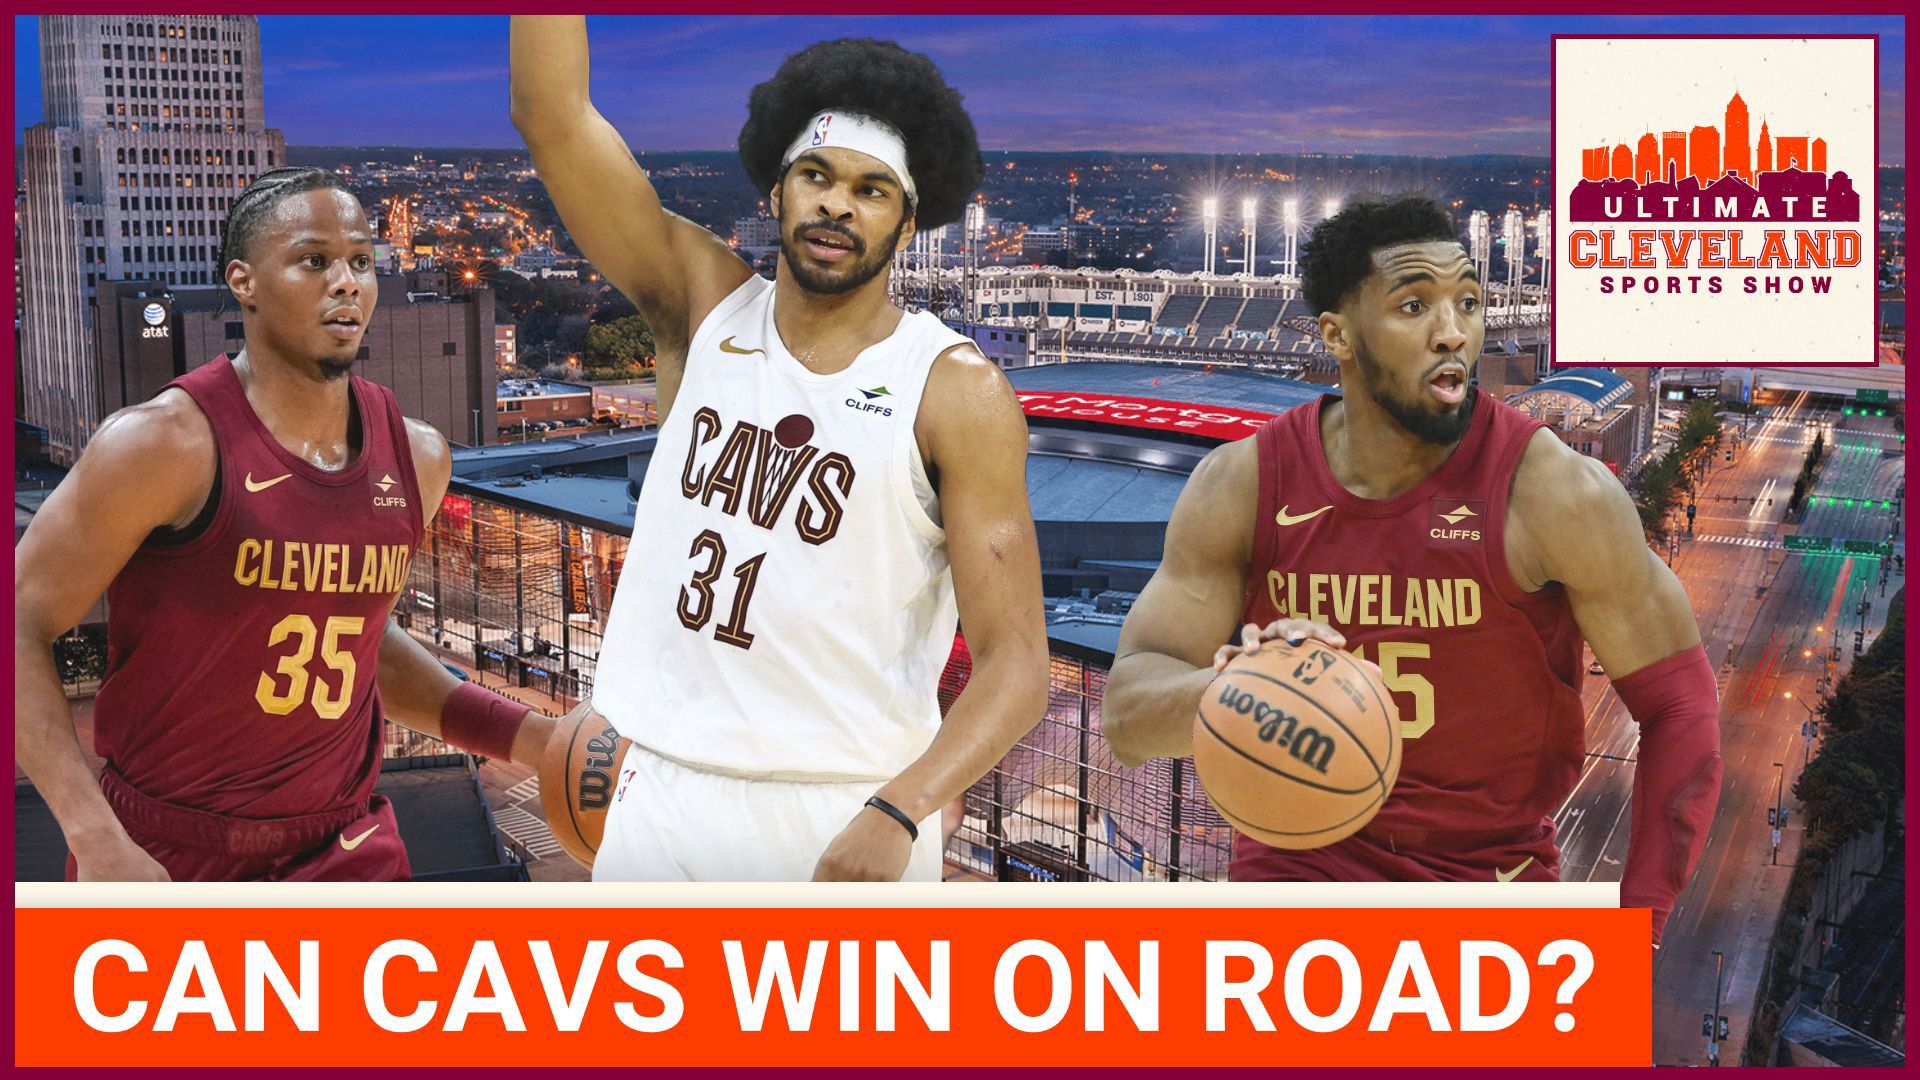 UCSS has the conversation on whether or not the Cavs will take Game 3 on the road